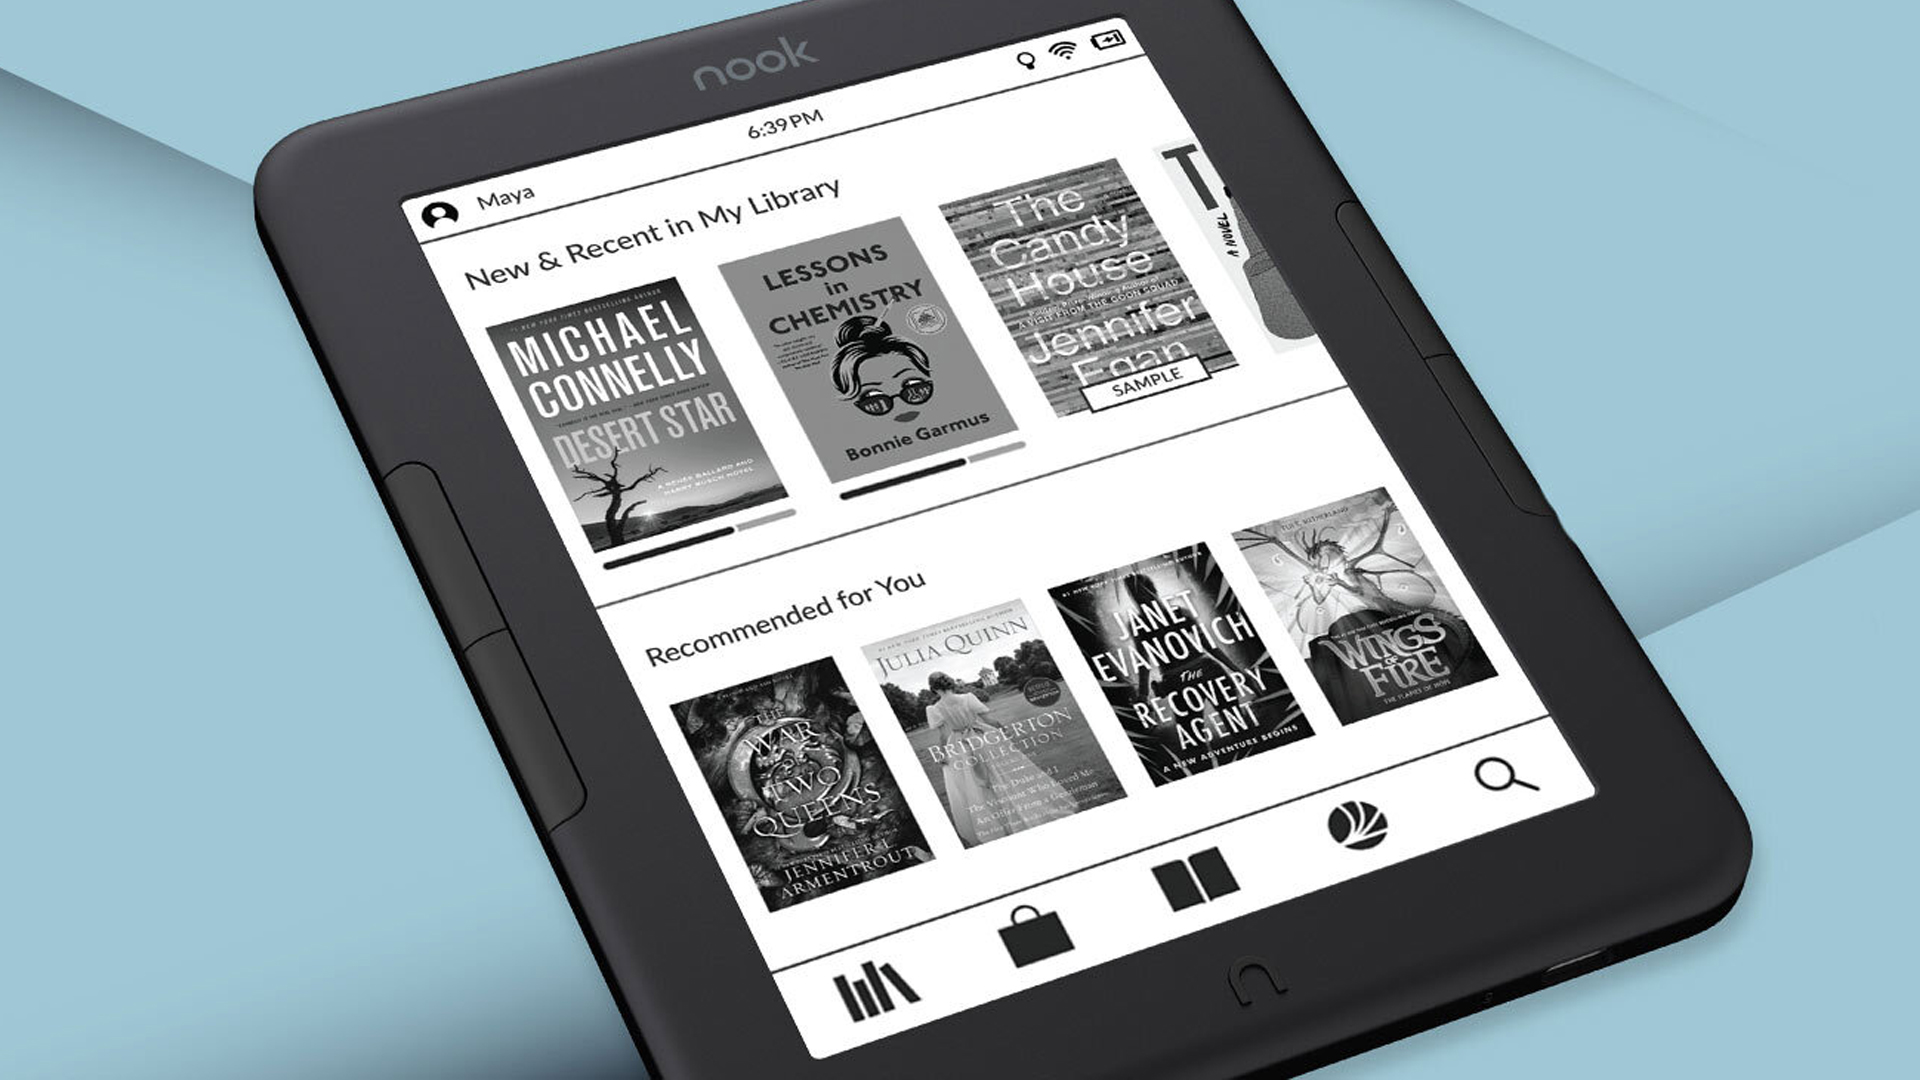 Barnes & Noble's new Nook ereader is cheaper but with tradeoffs | TechRadar